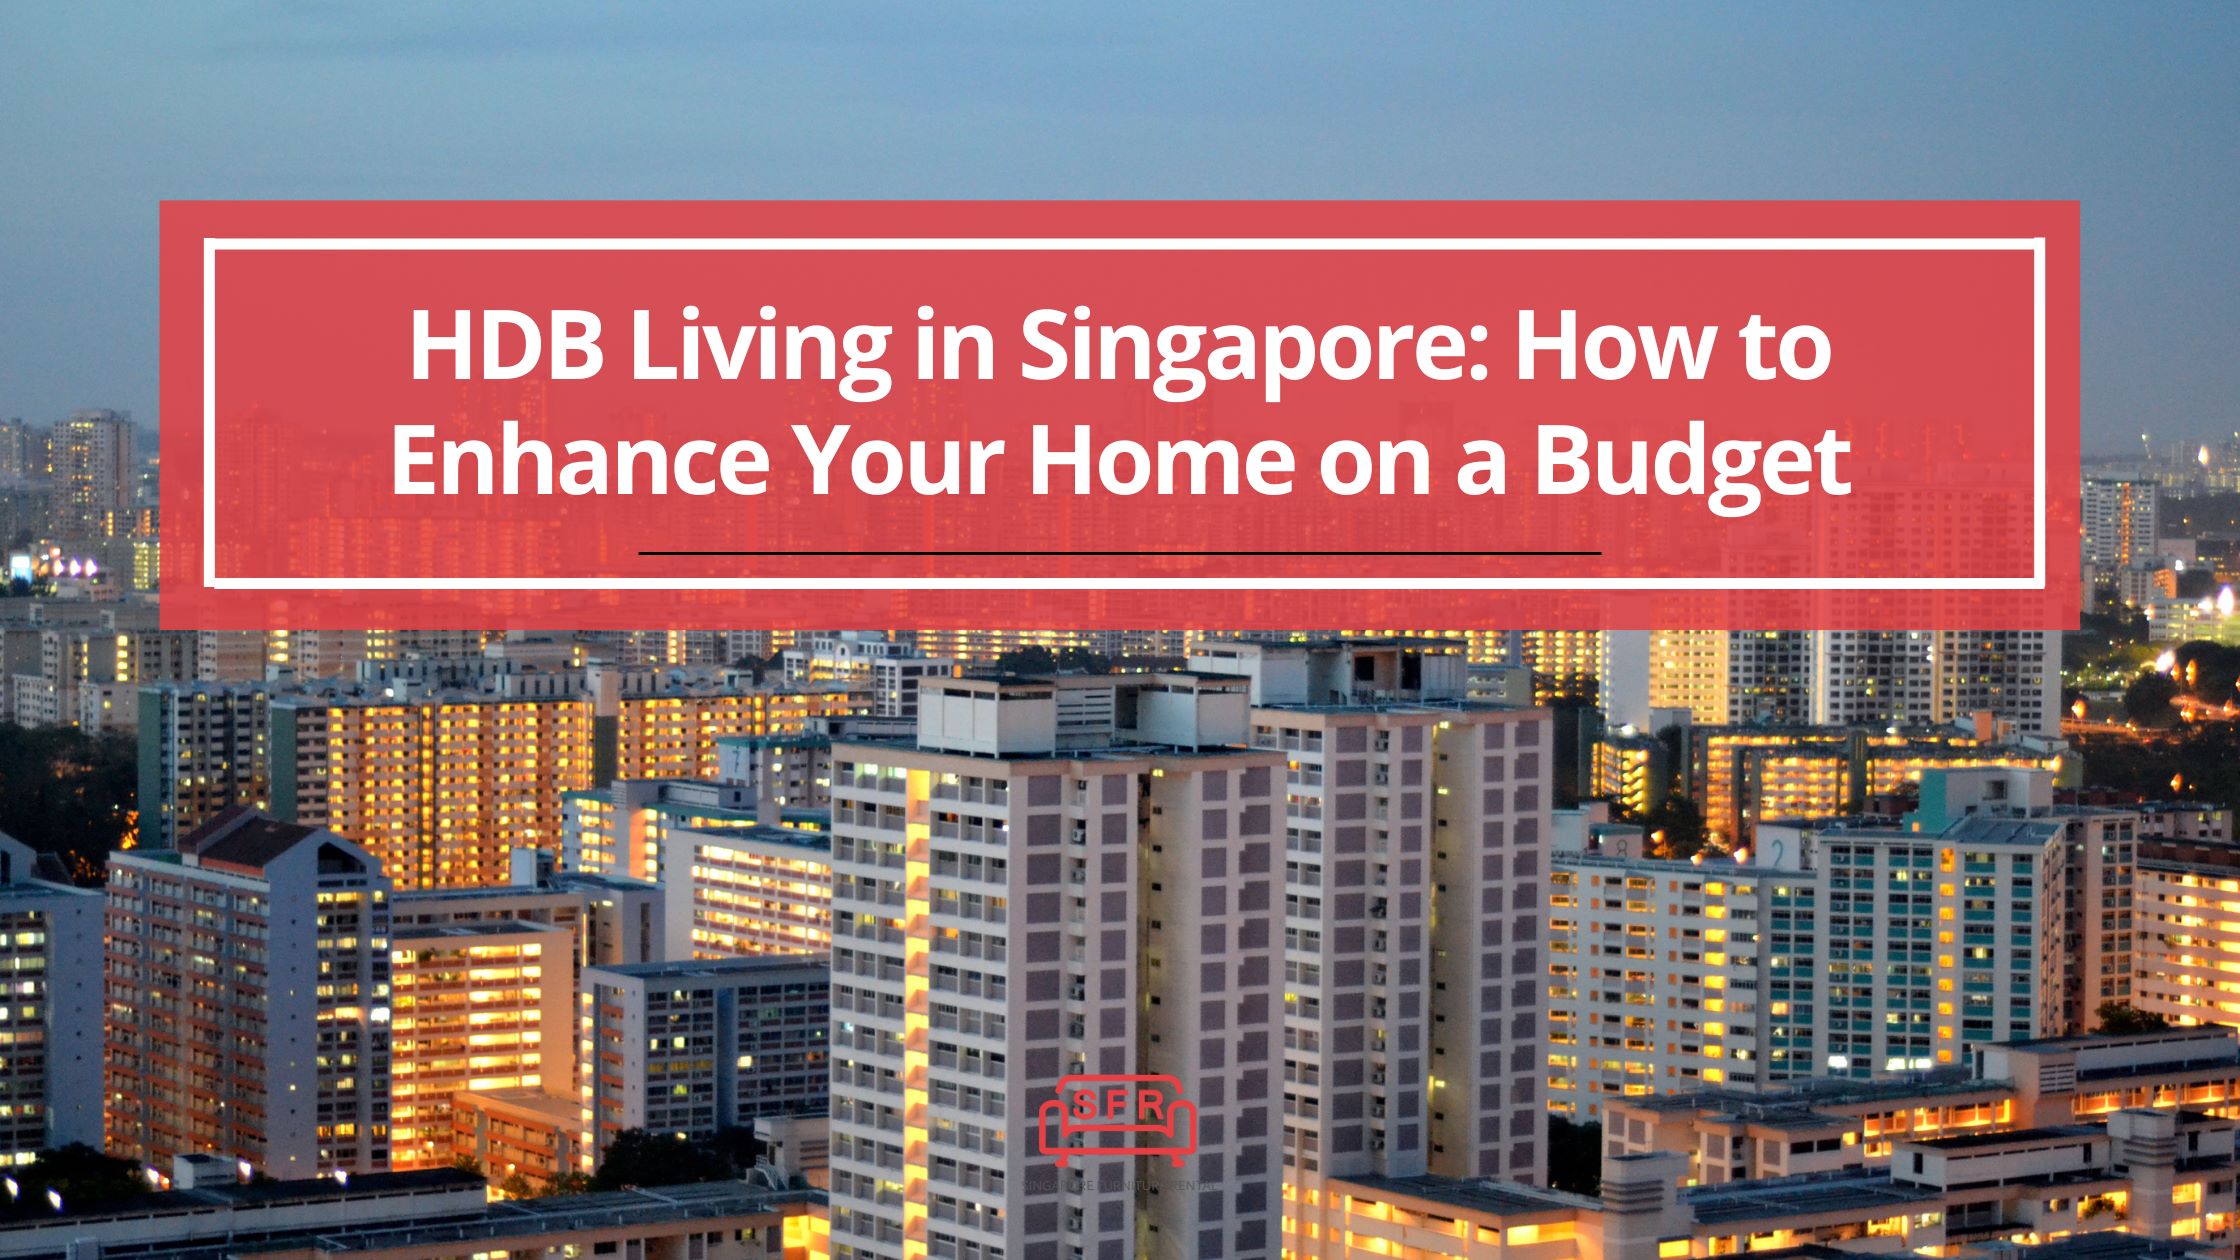 HDB Living in Singapore: How to Enhance Your Home on a Budget